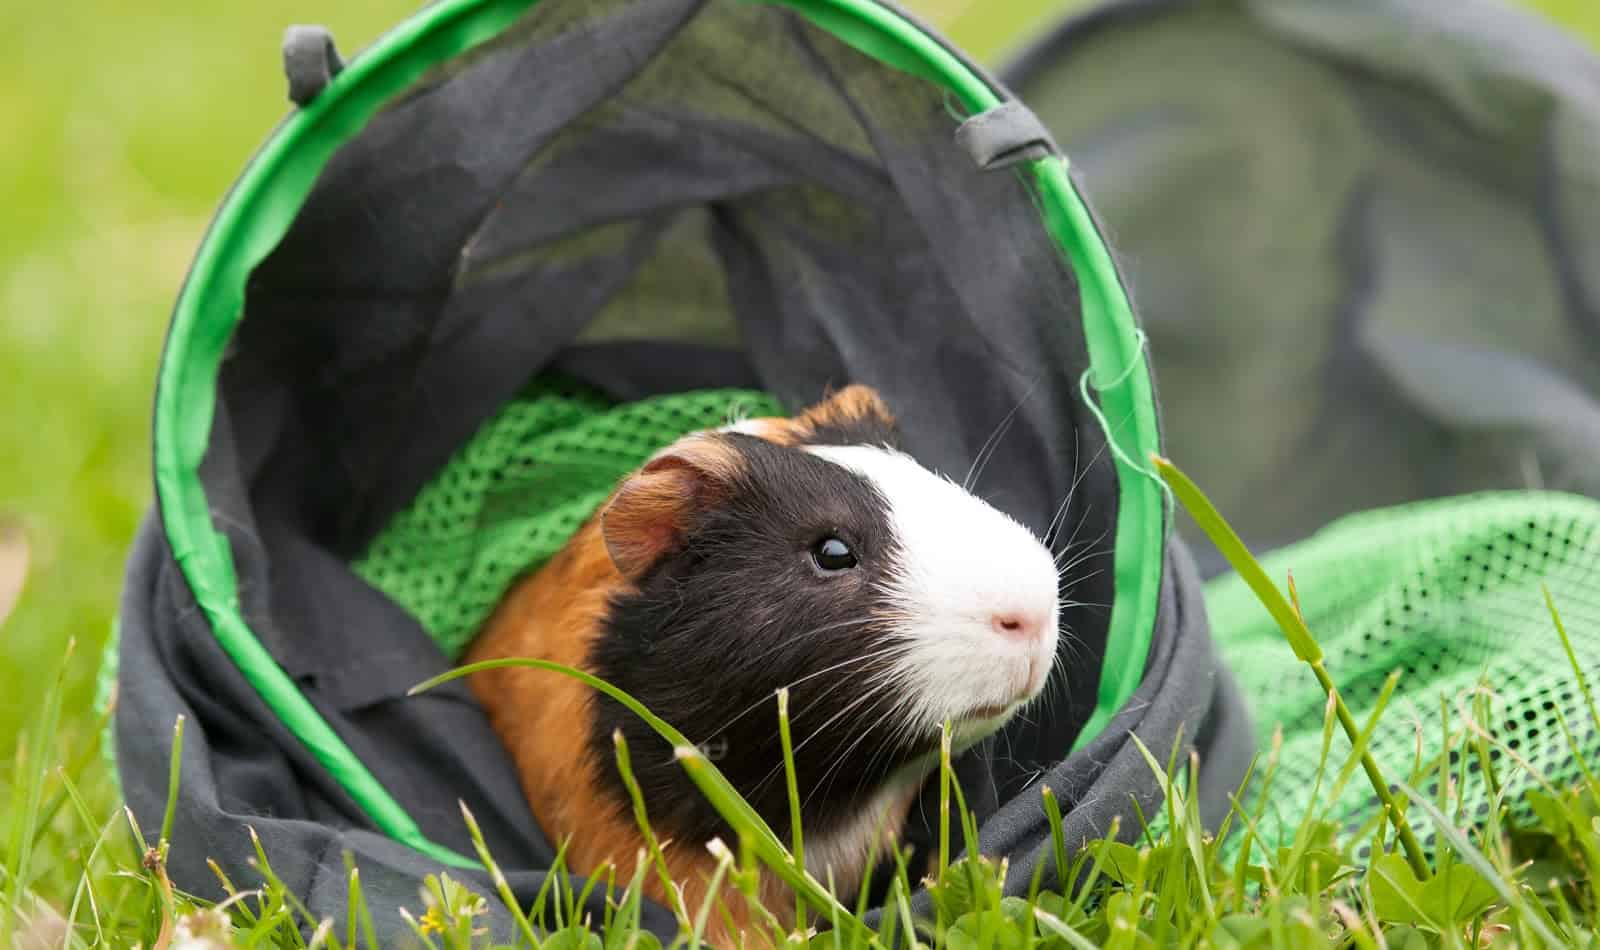 These boredom buster ideas for your guinea pig will help her live the best life possible. Check them out and try some today!